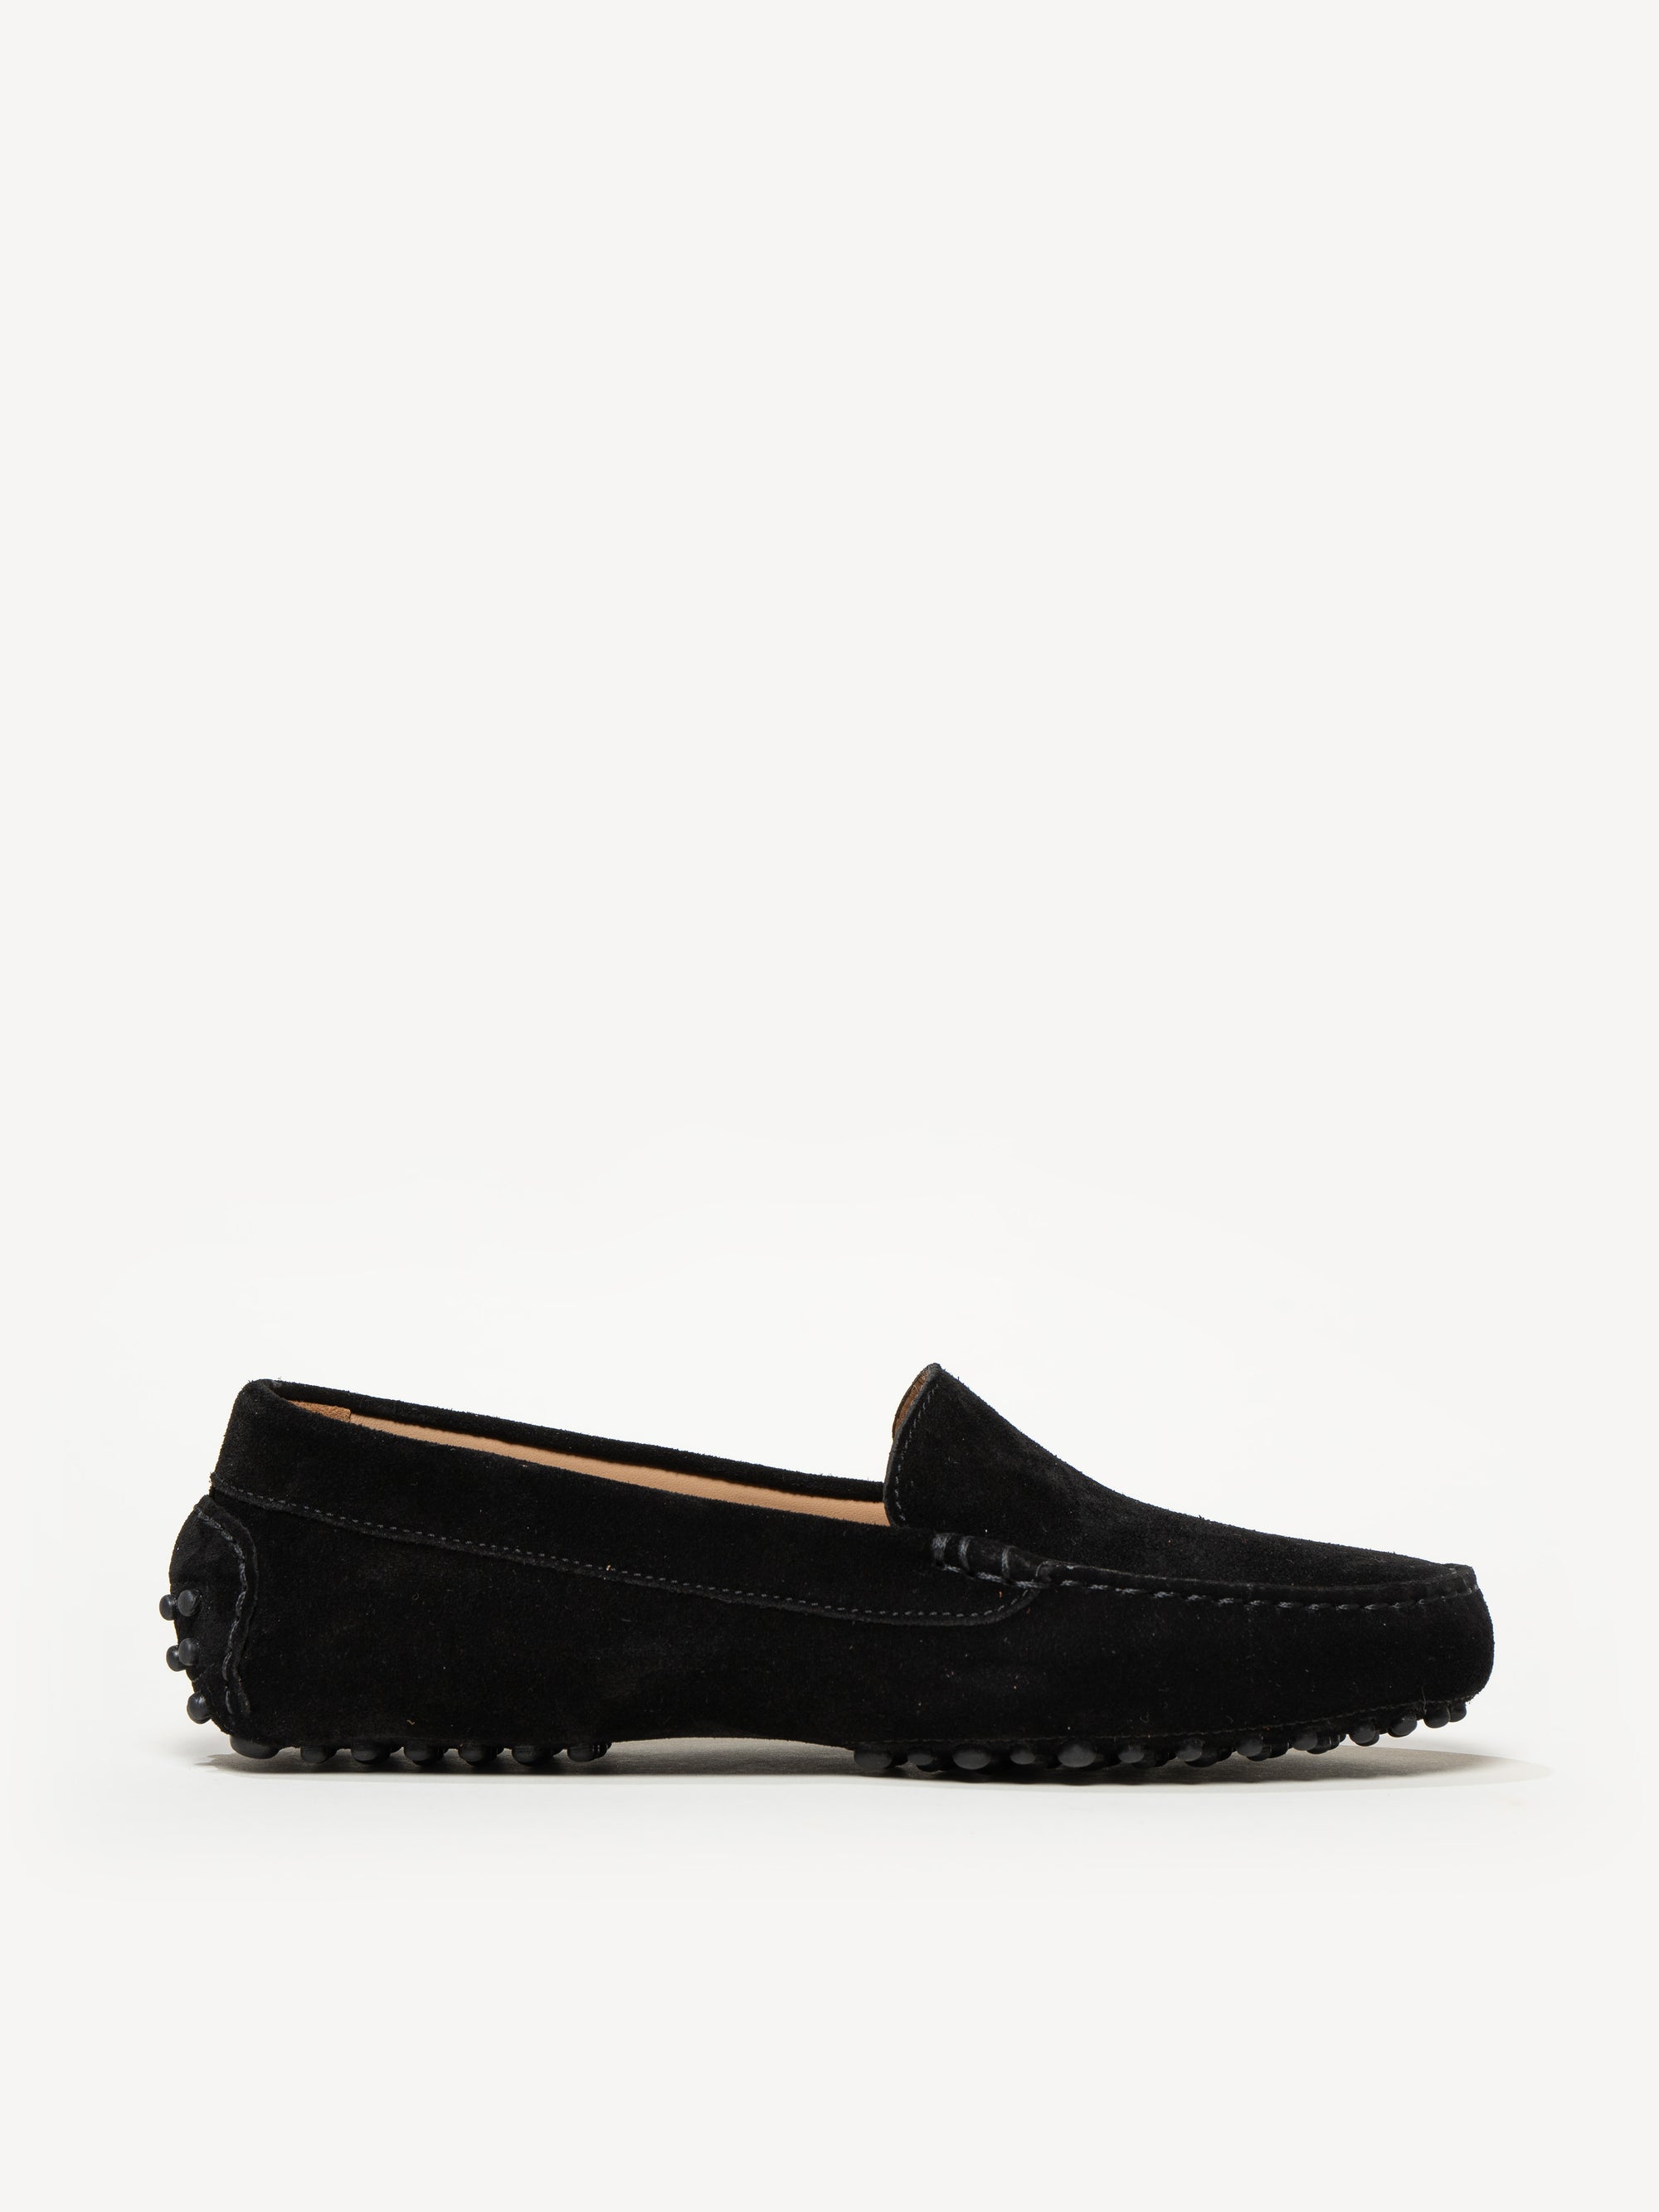 The Felize Suede - Suede Moccasin - Black with Black Pegs - M.Gemi